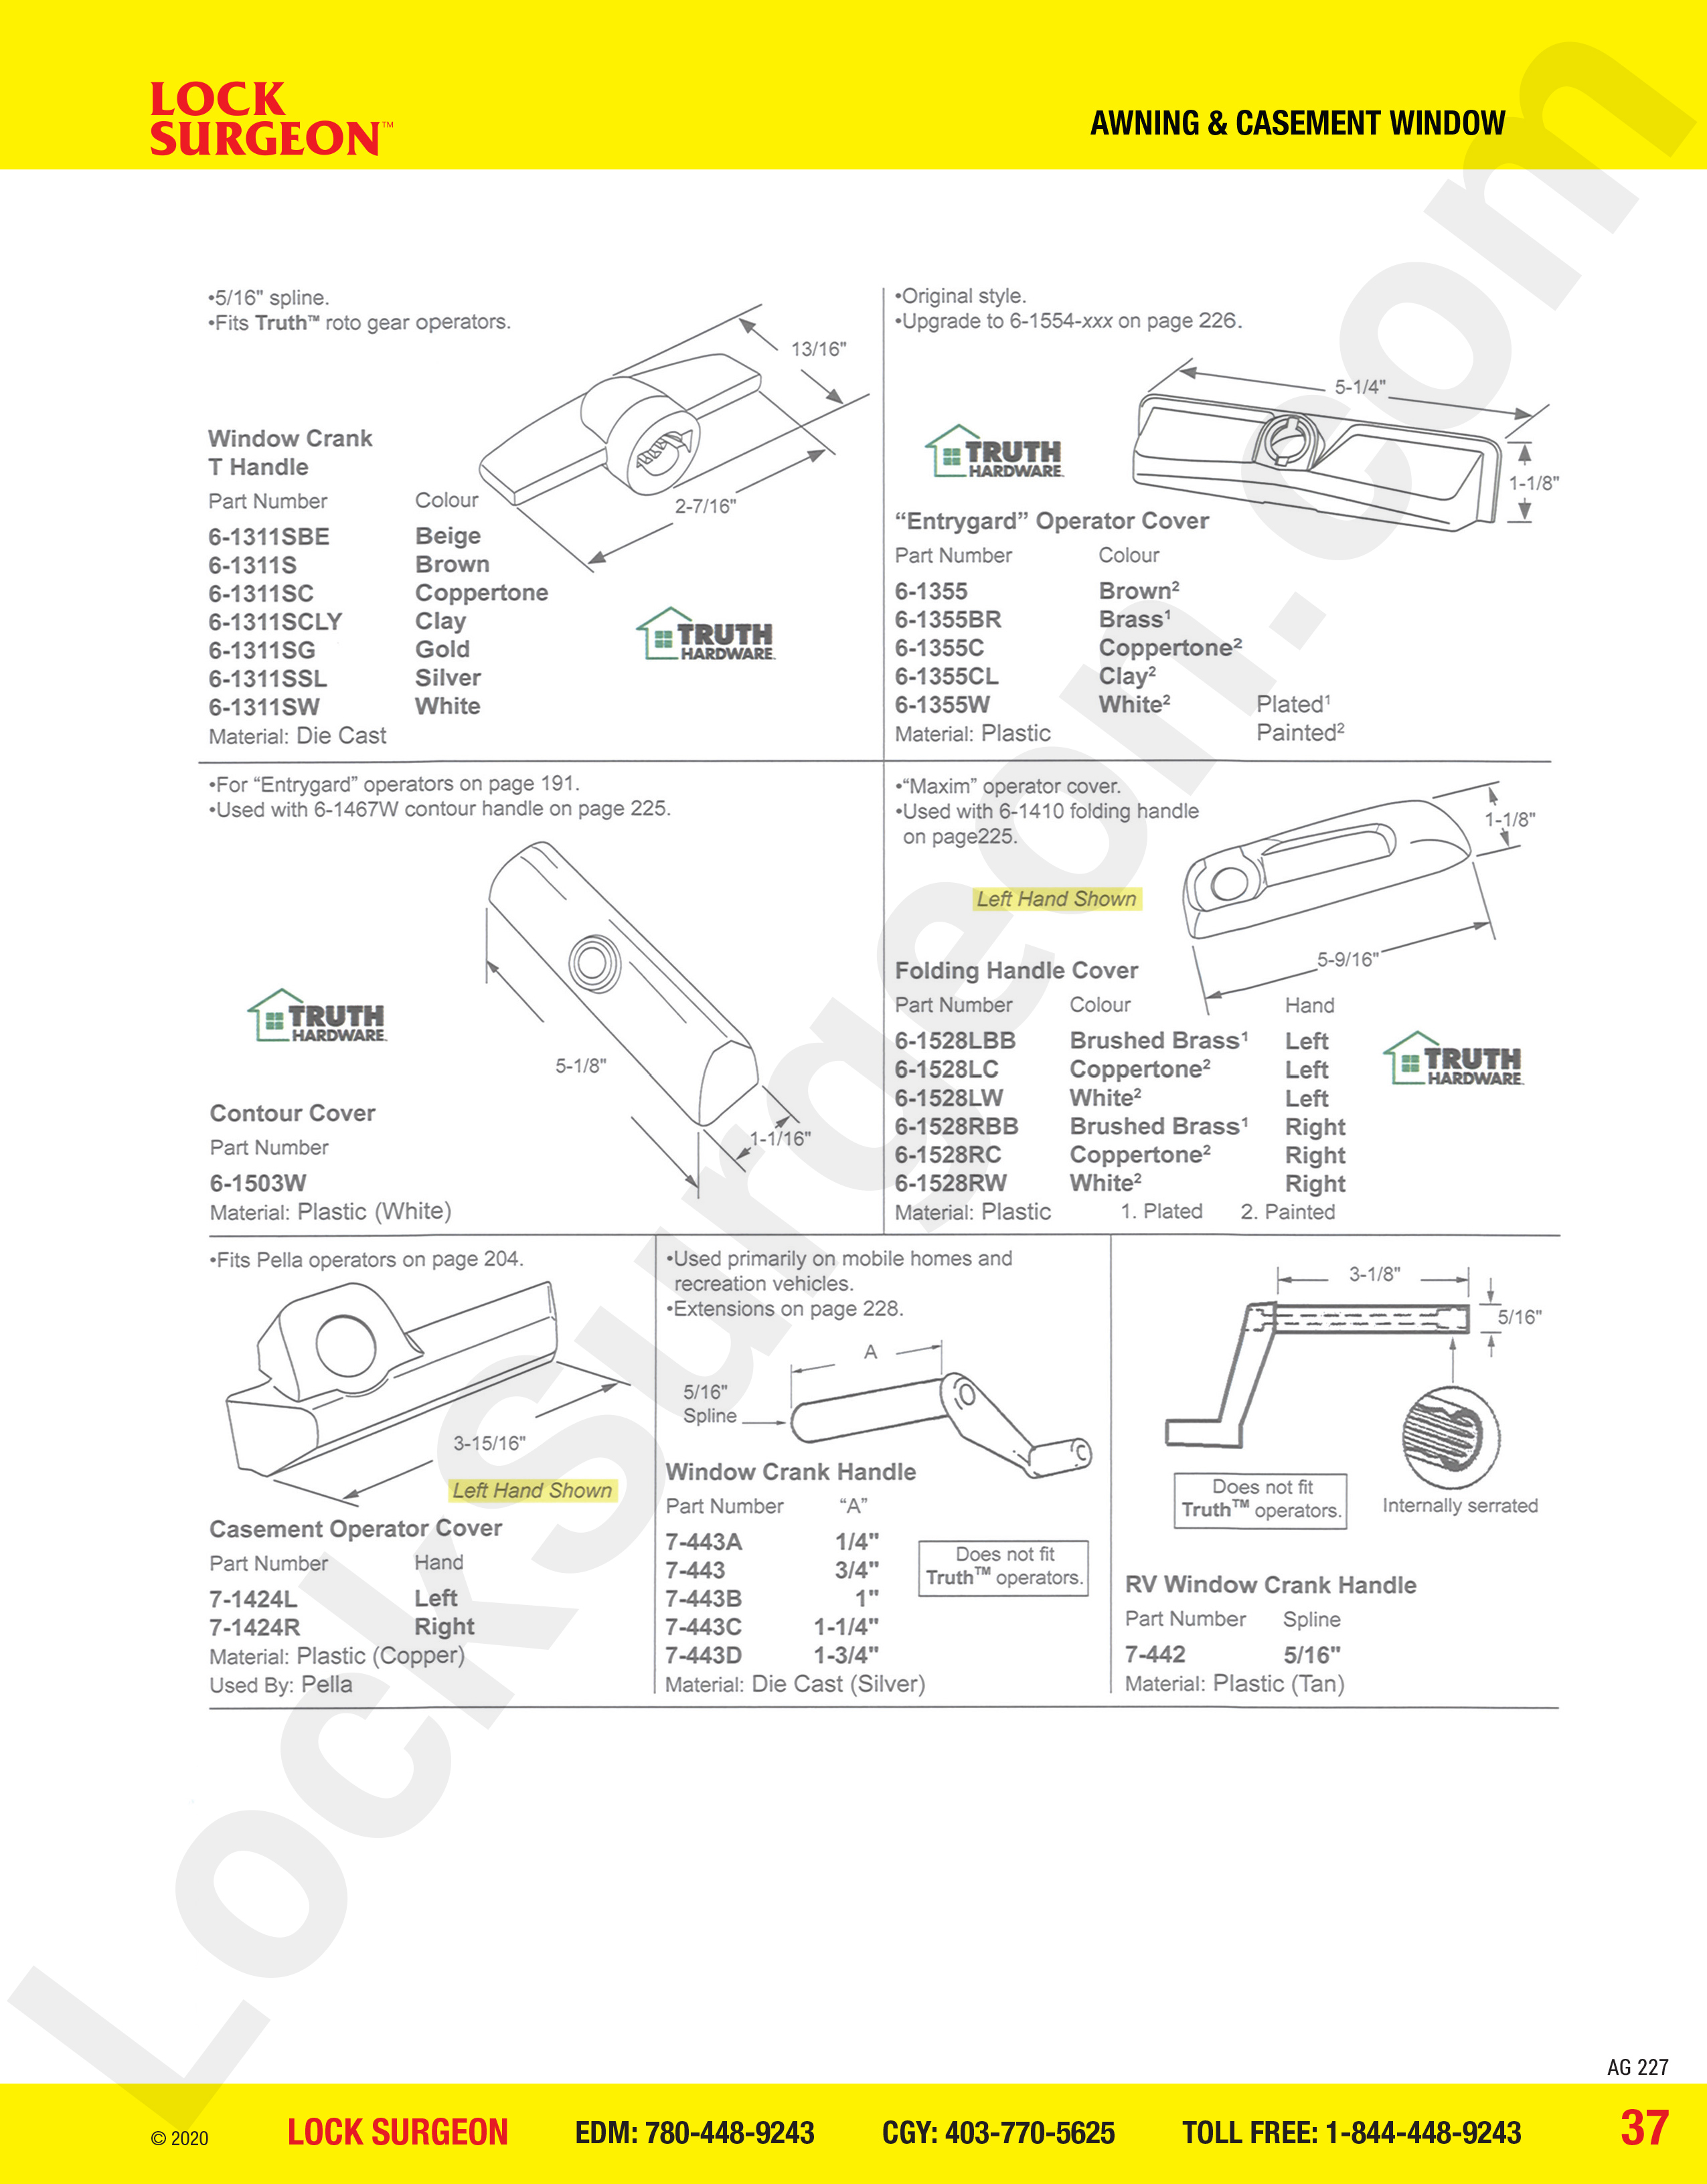 awning and casement window parts for covers and handles.